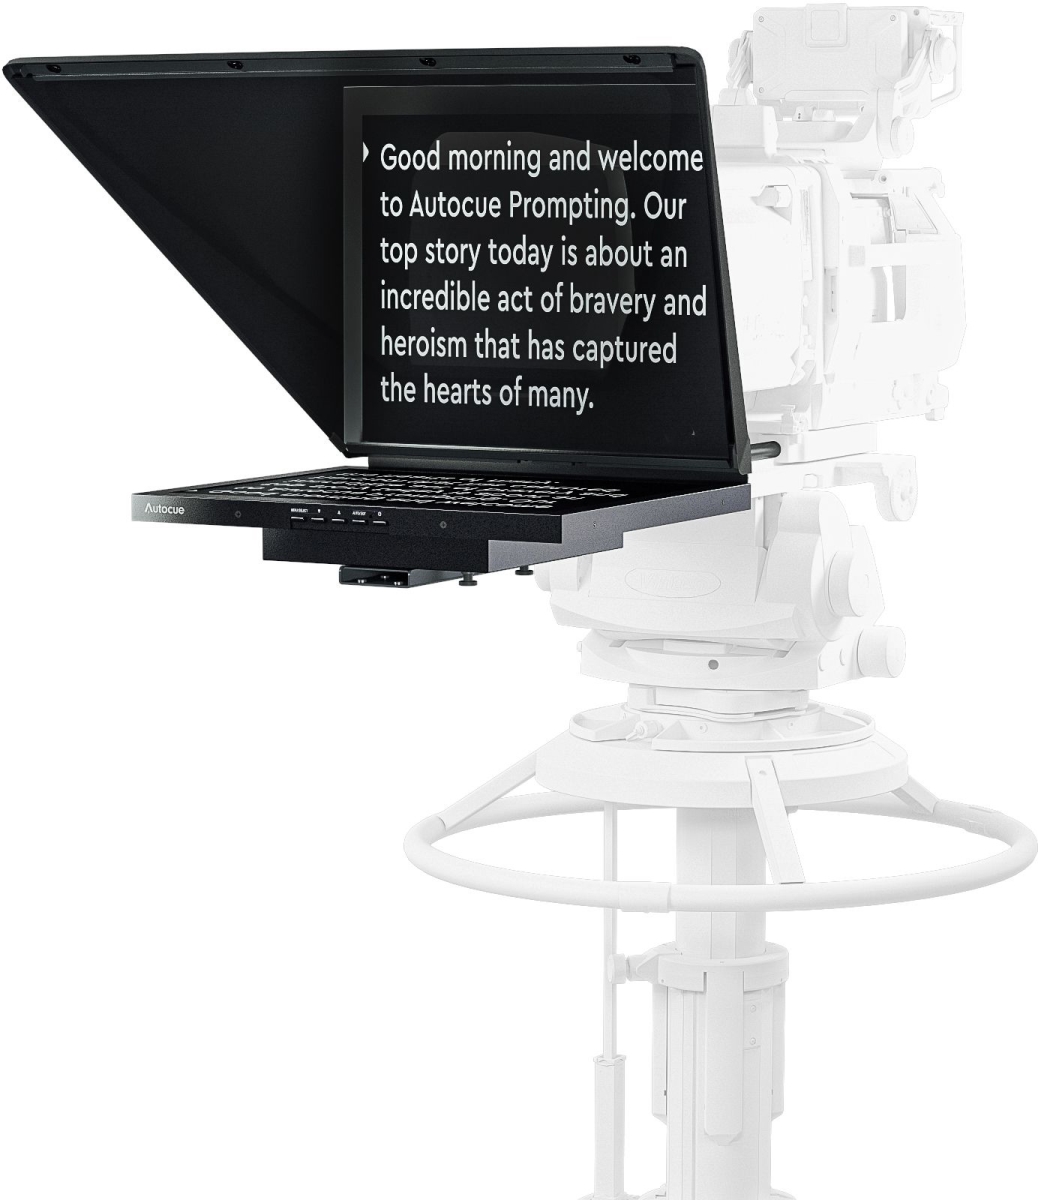 Picture of Autocue ACU-P7008-0900 19 in. Pioneer Studio Box Lens Teleprompter for Heavyweight Camera Setups